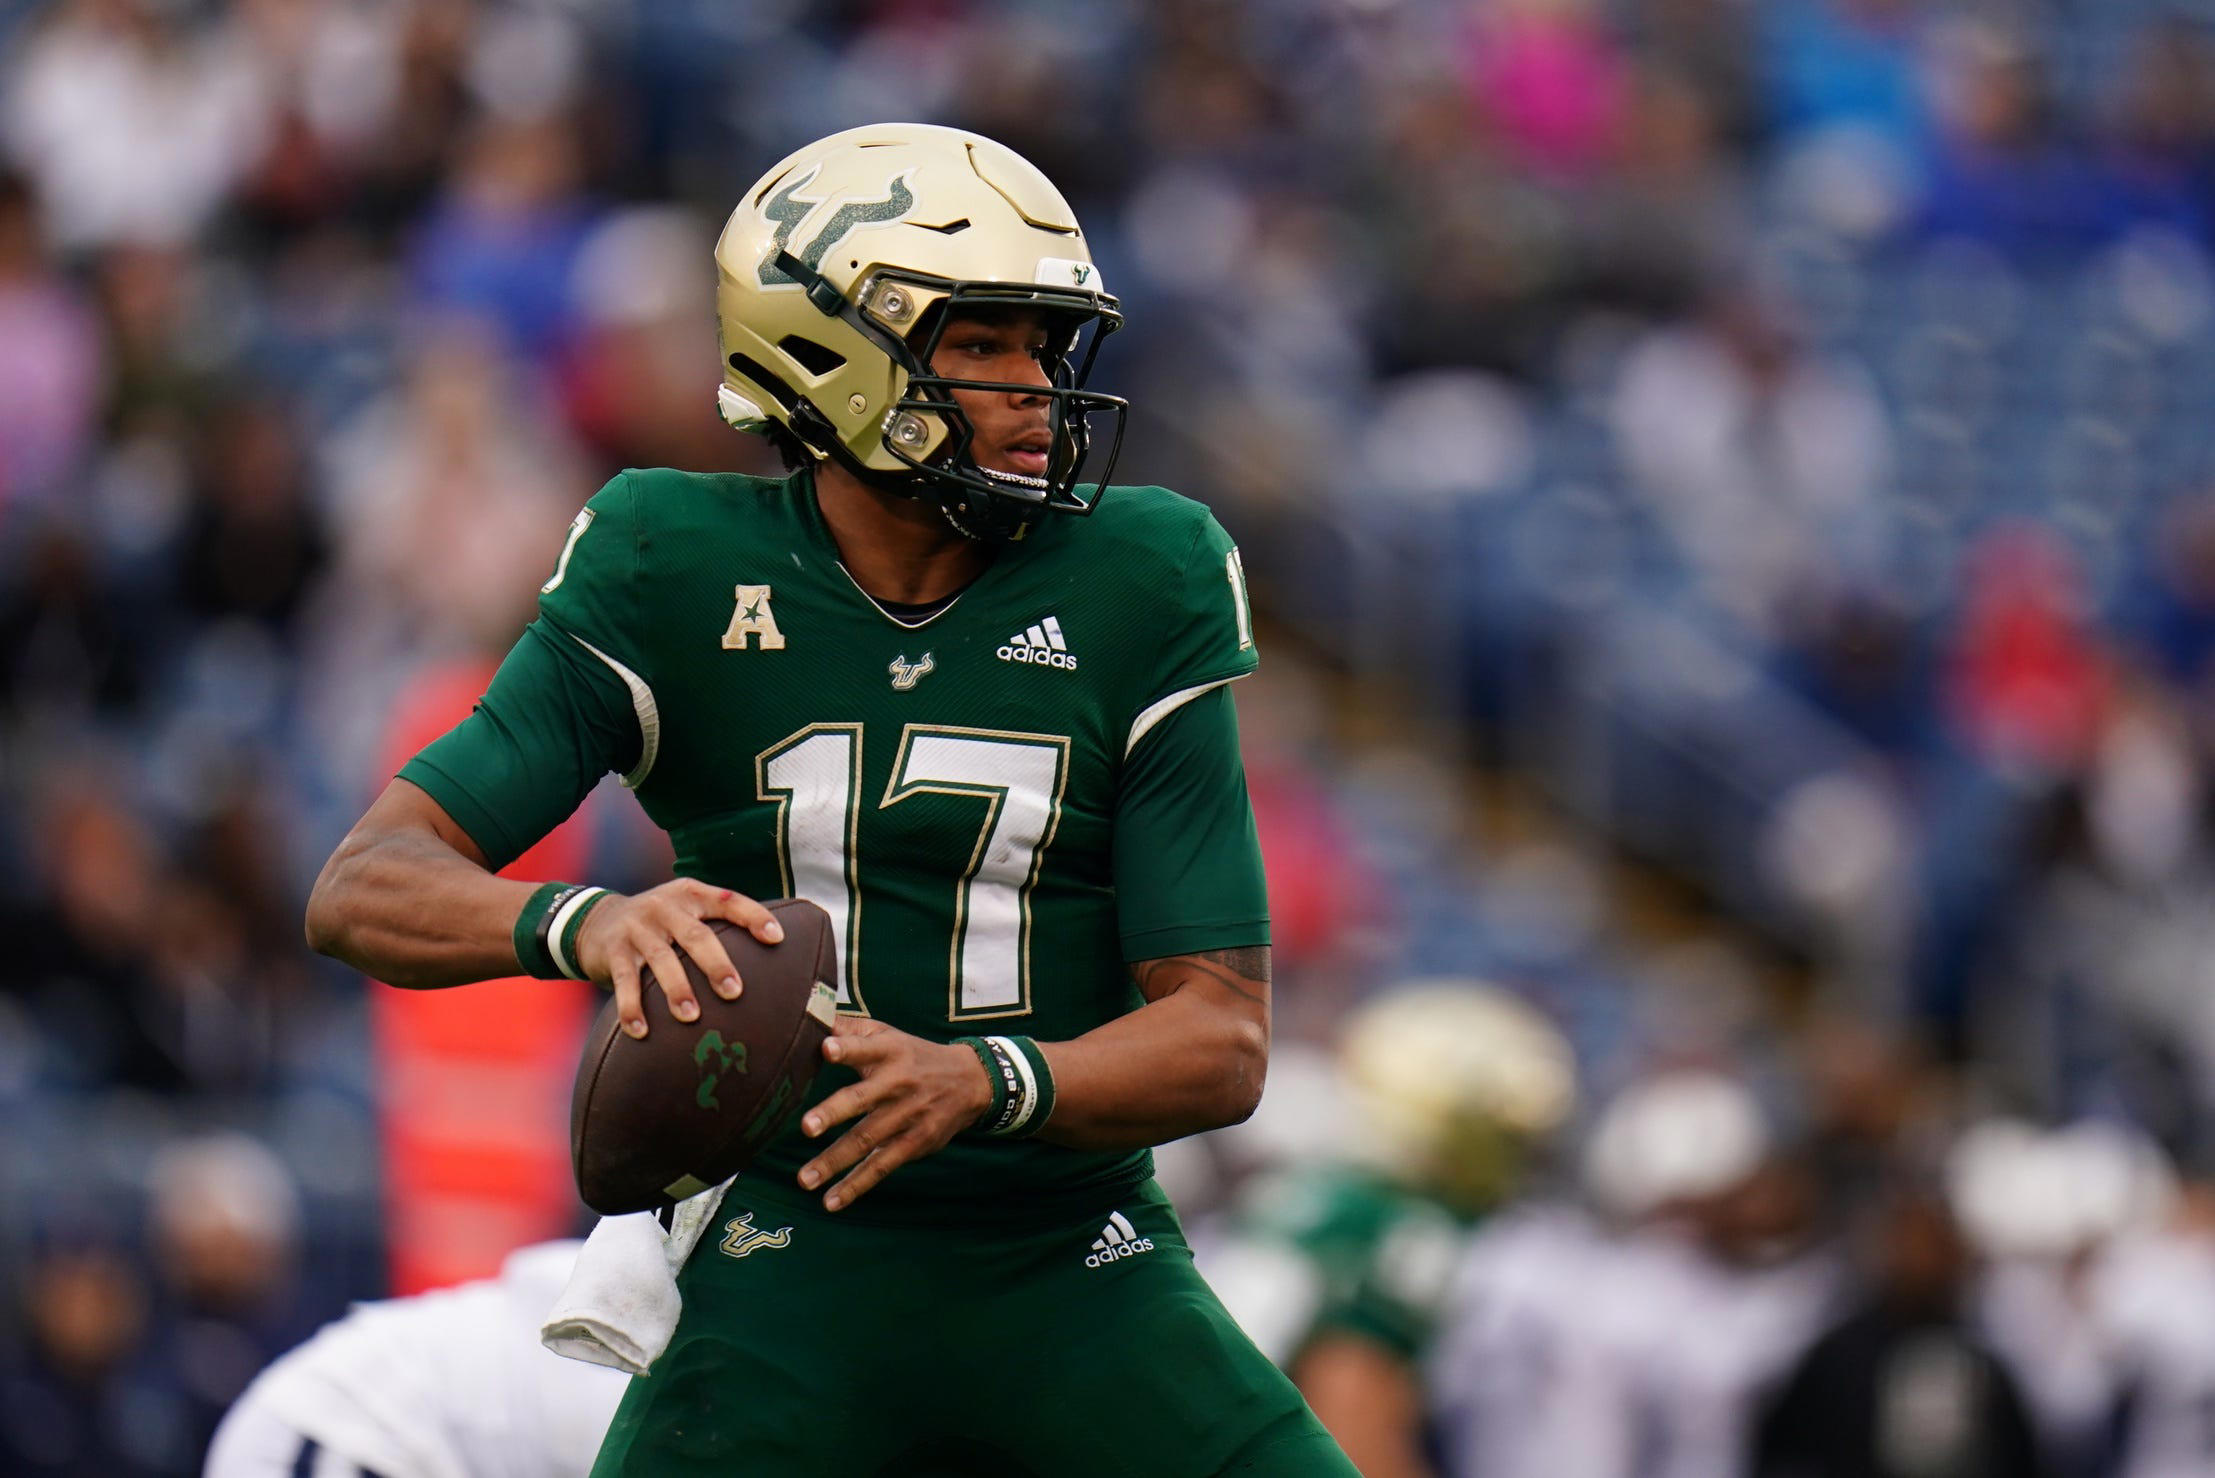 Syracuse vs. University of South Florida schedule Odds and how to